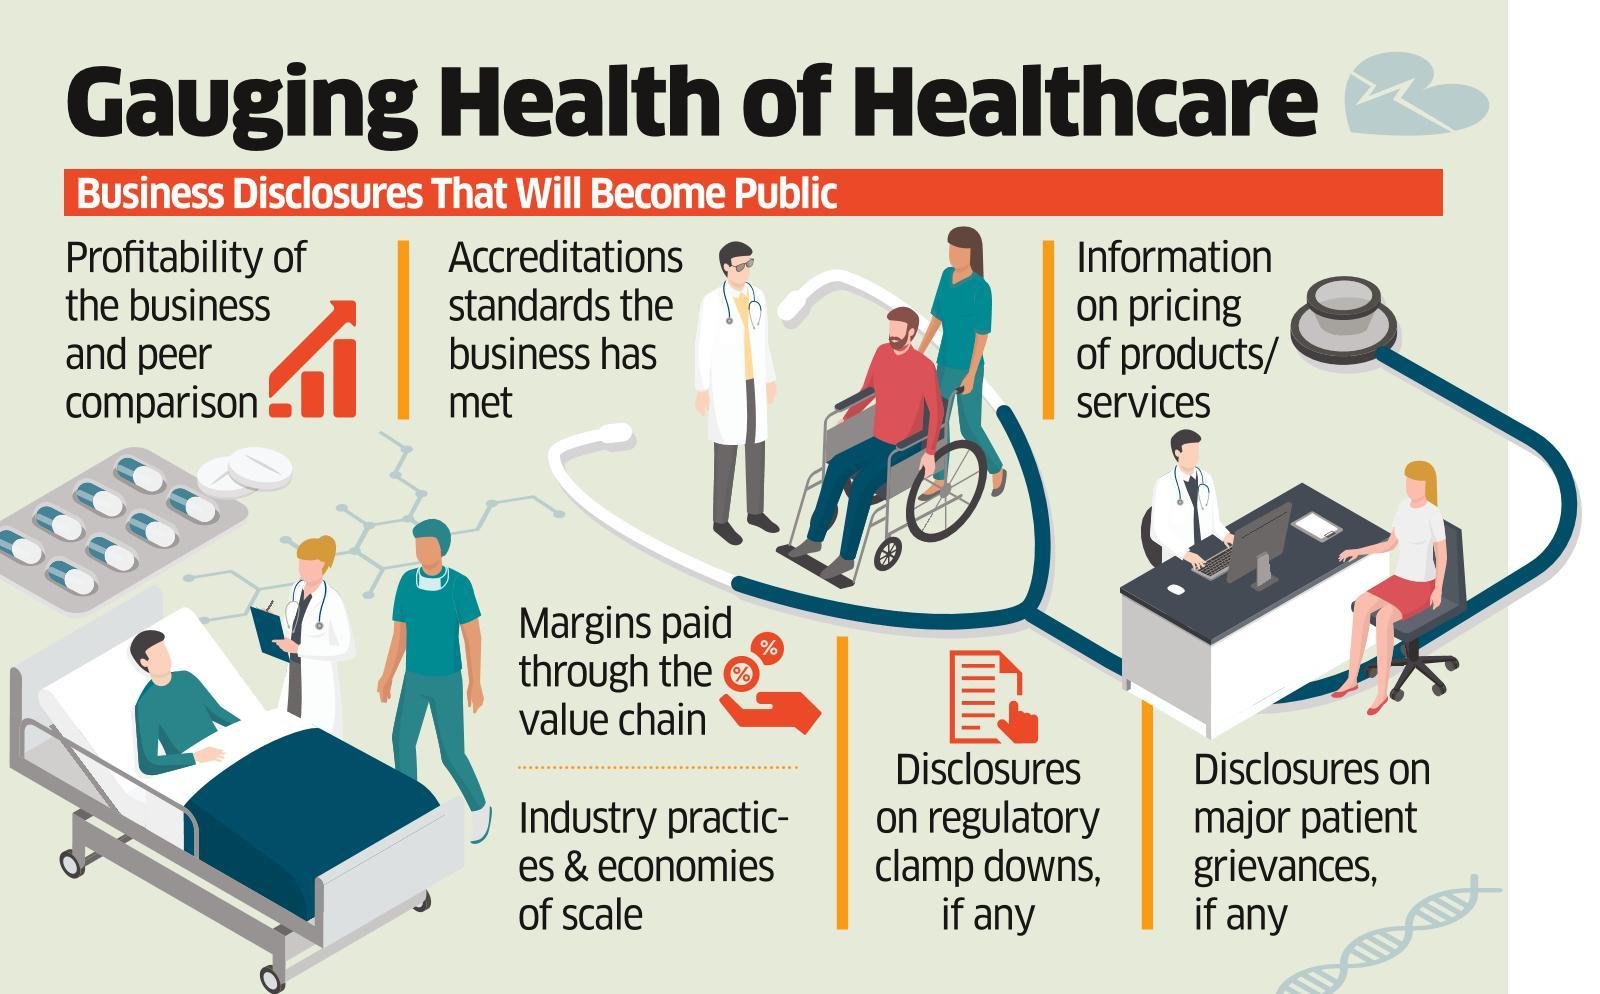 More Healthcare Businesses Keen to Take a Shot at Primary Market